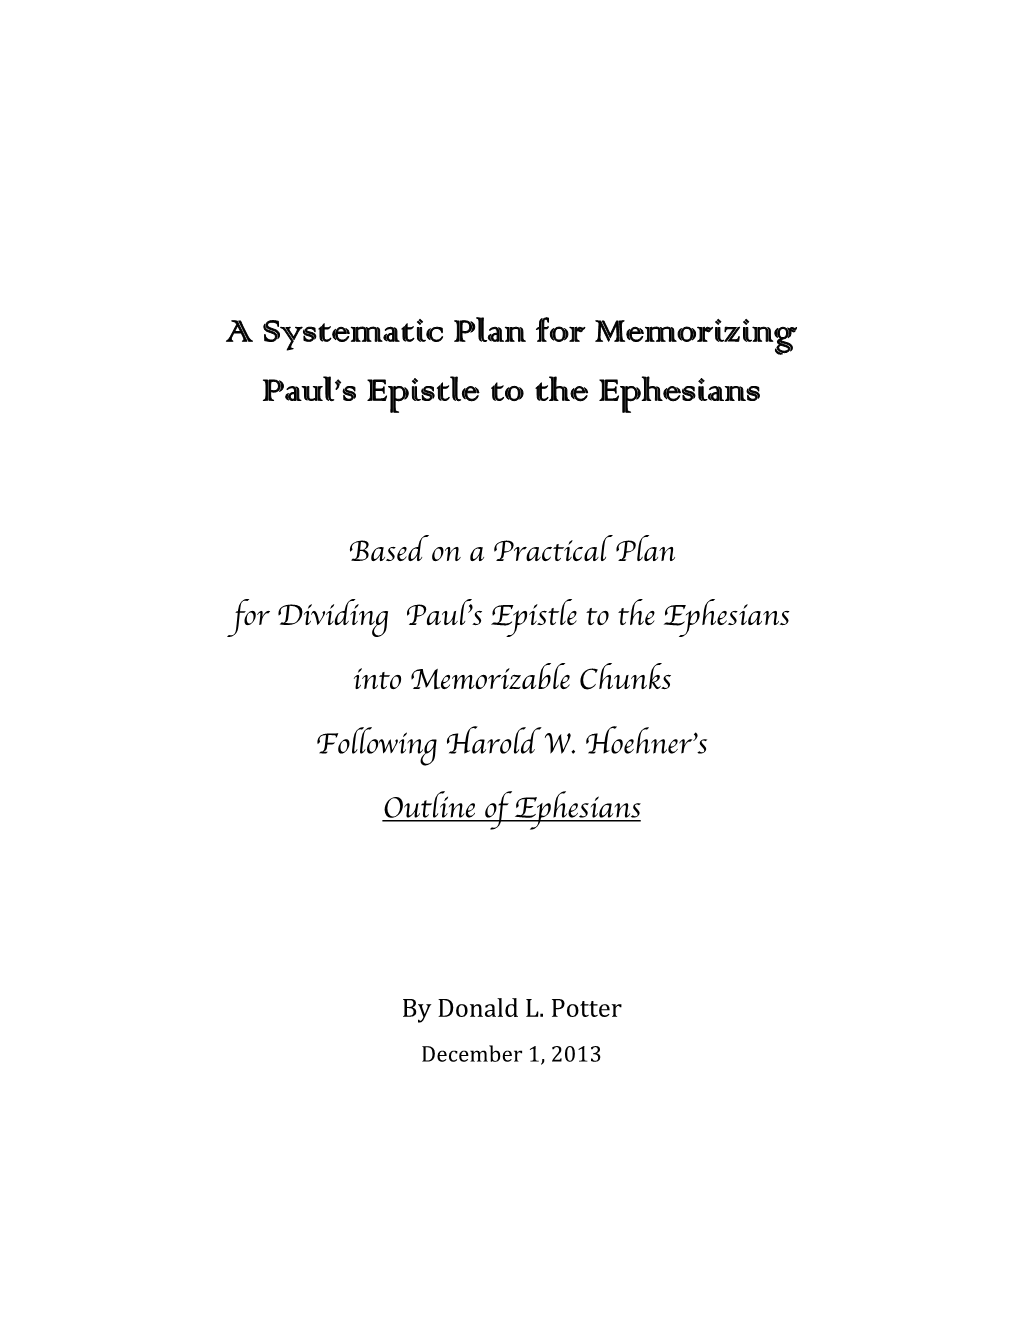 A Systematic Plan for Memorizing Paul's Epistle to the Ephesians